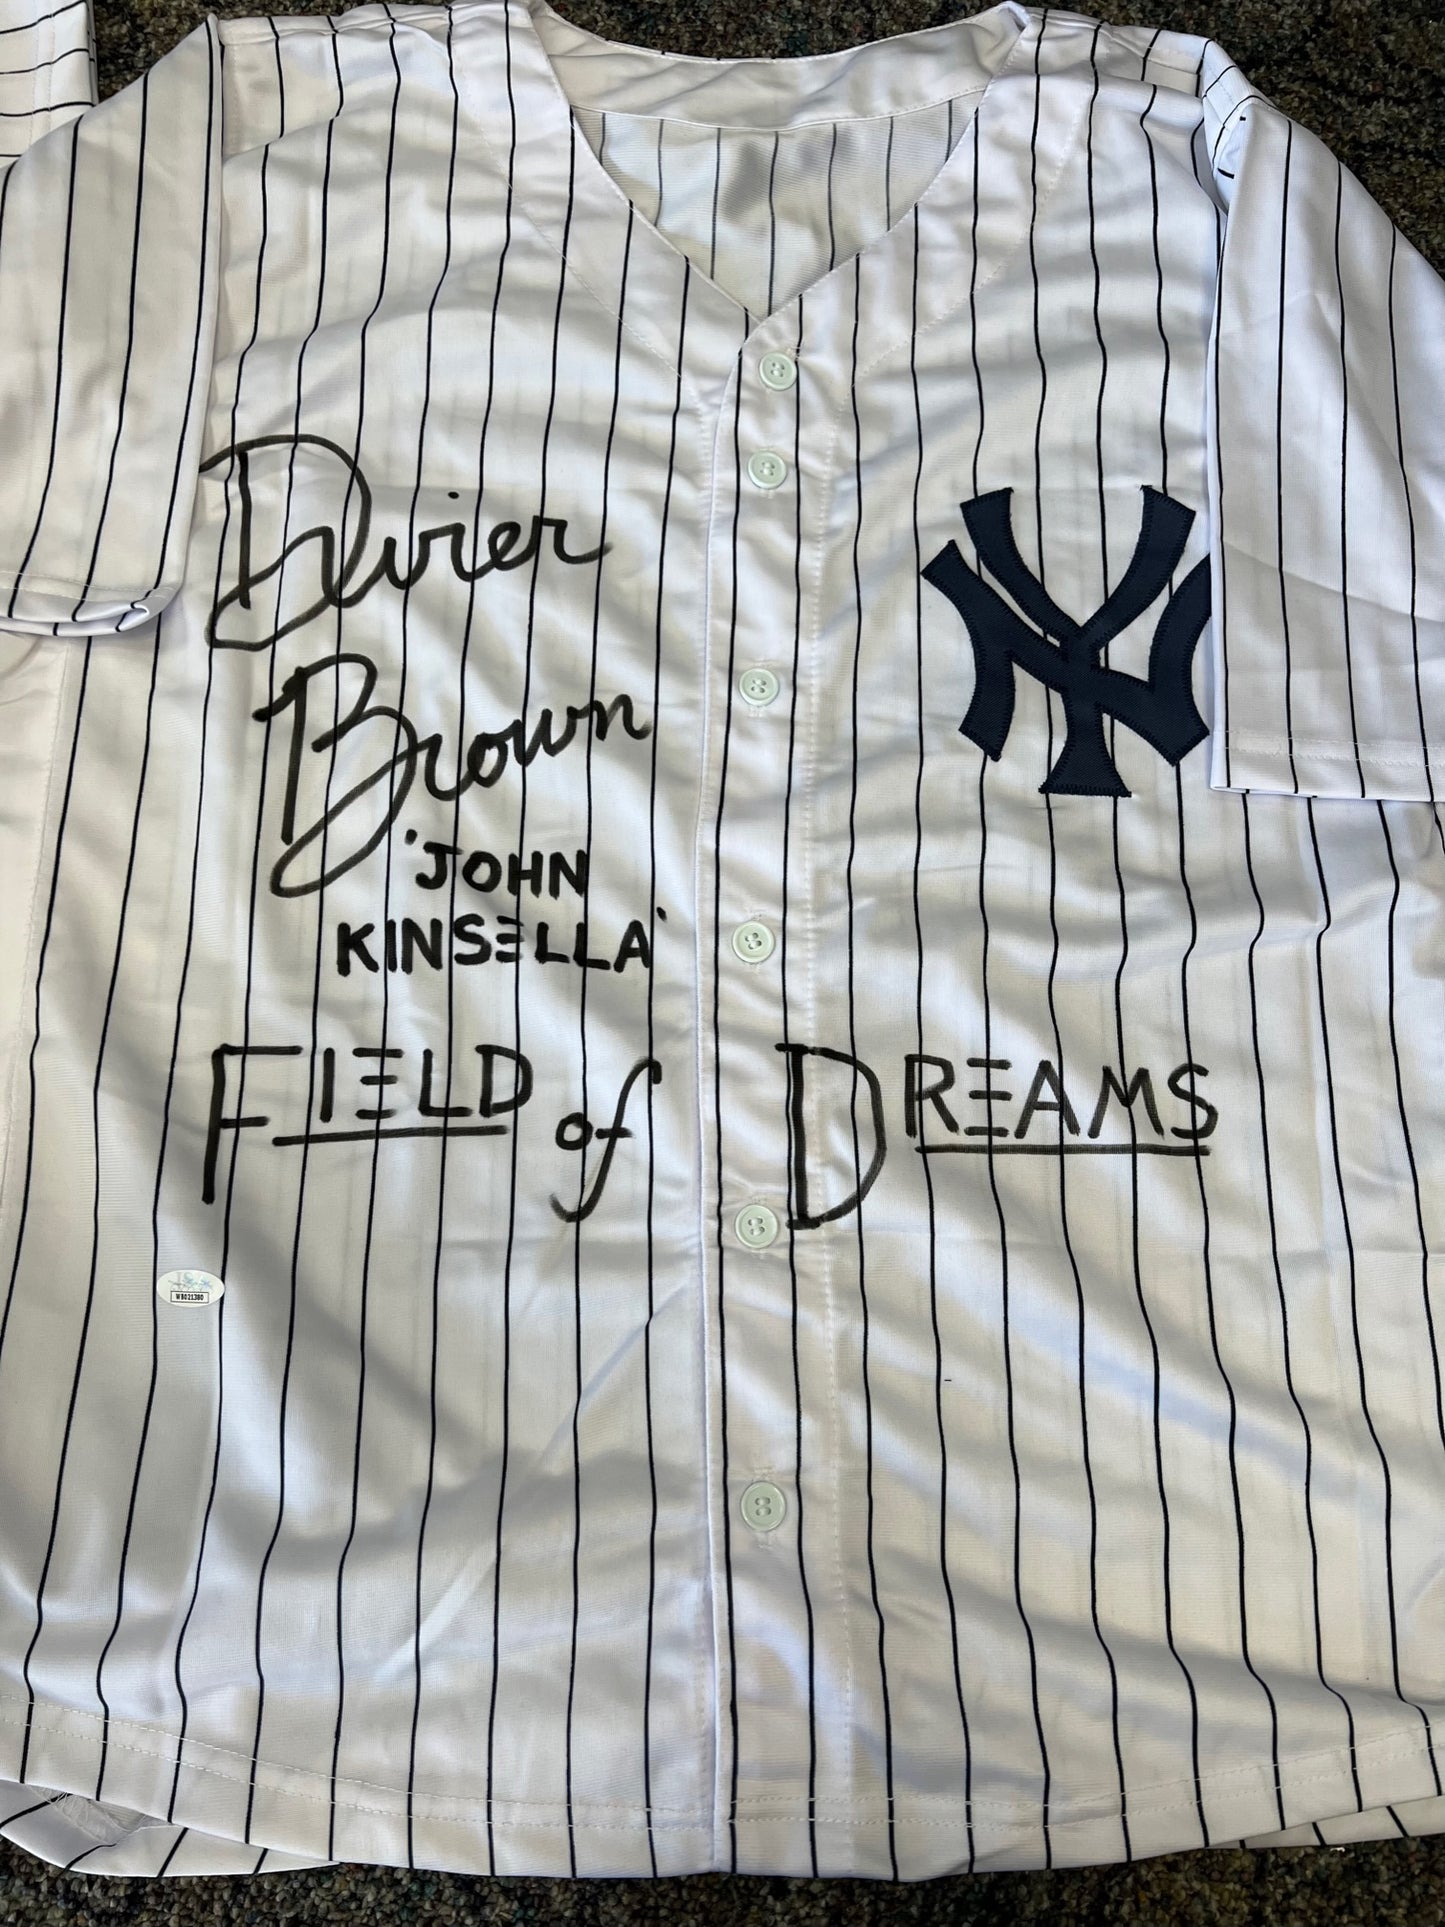 Field Of Dreams Dwier Brown Signed/Inscribed Yankees Jersey with JSA COA